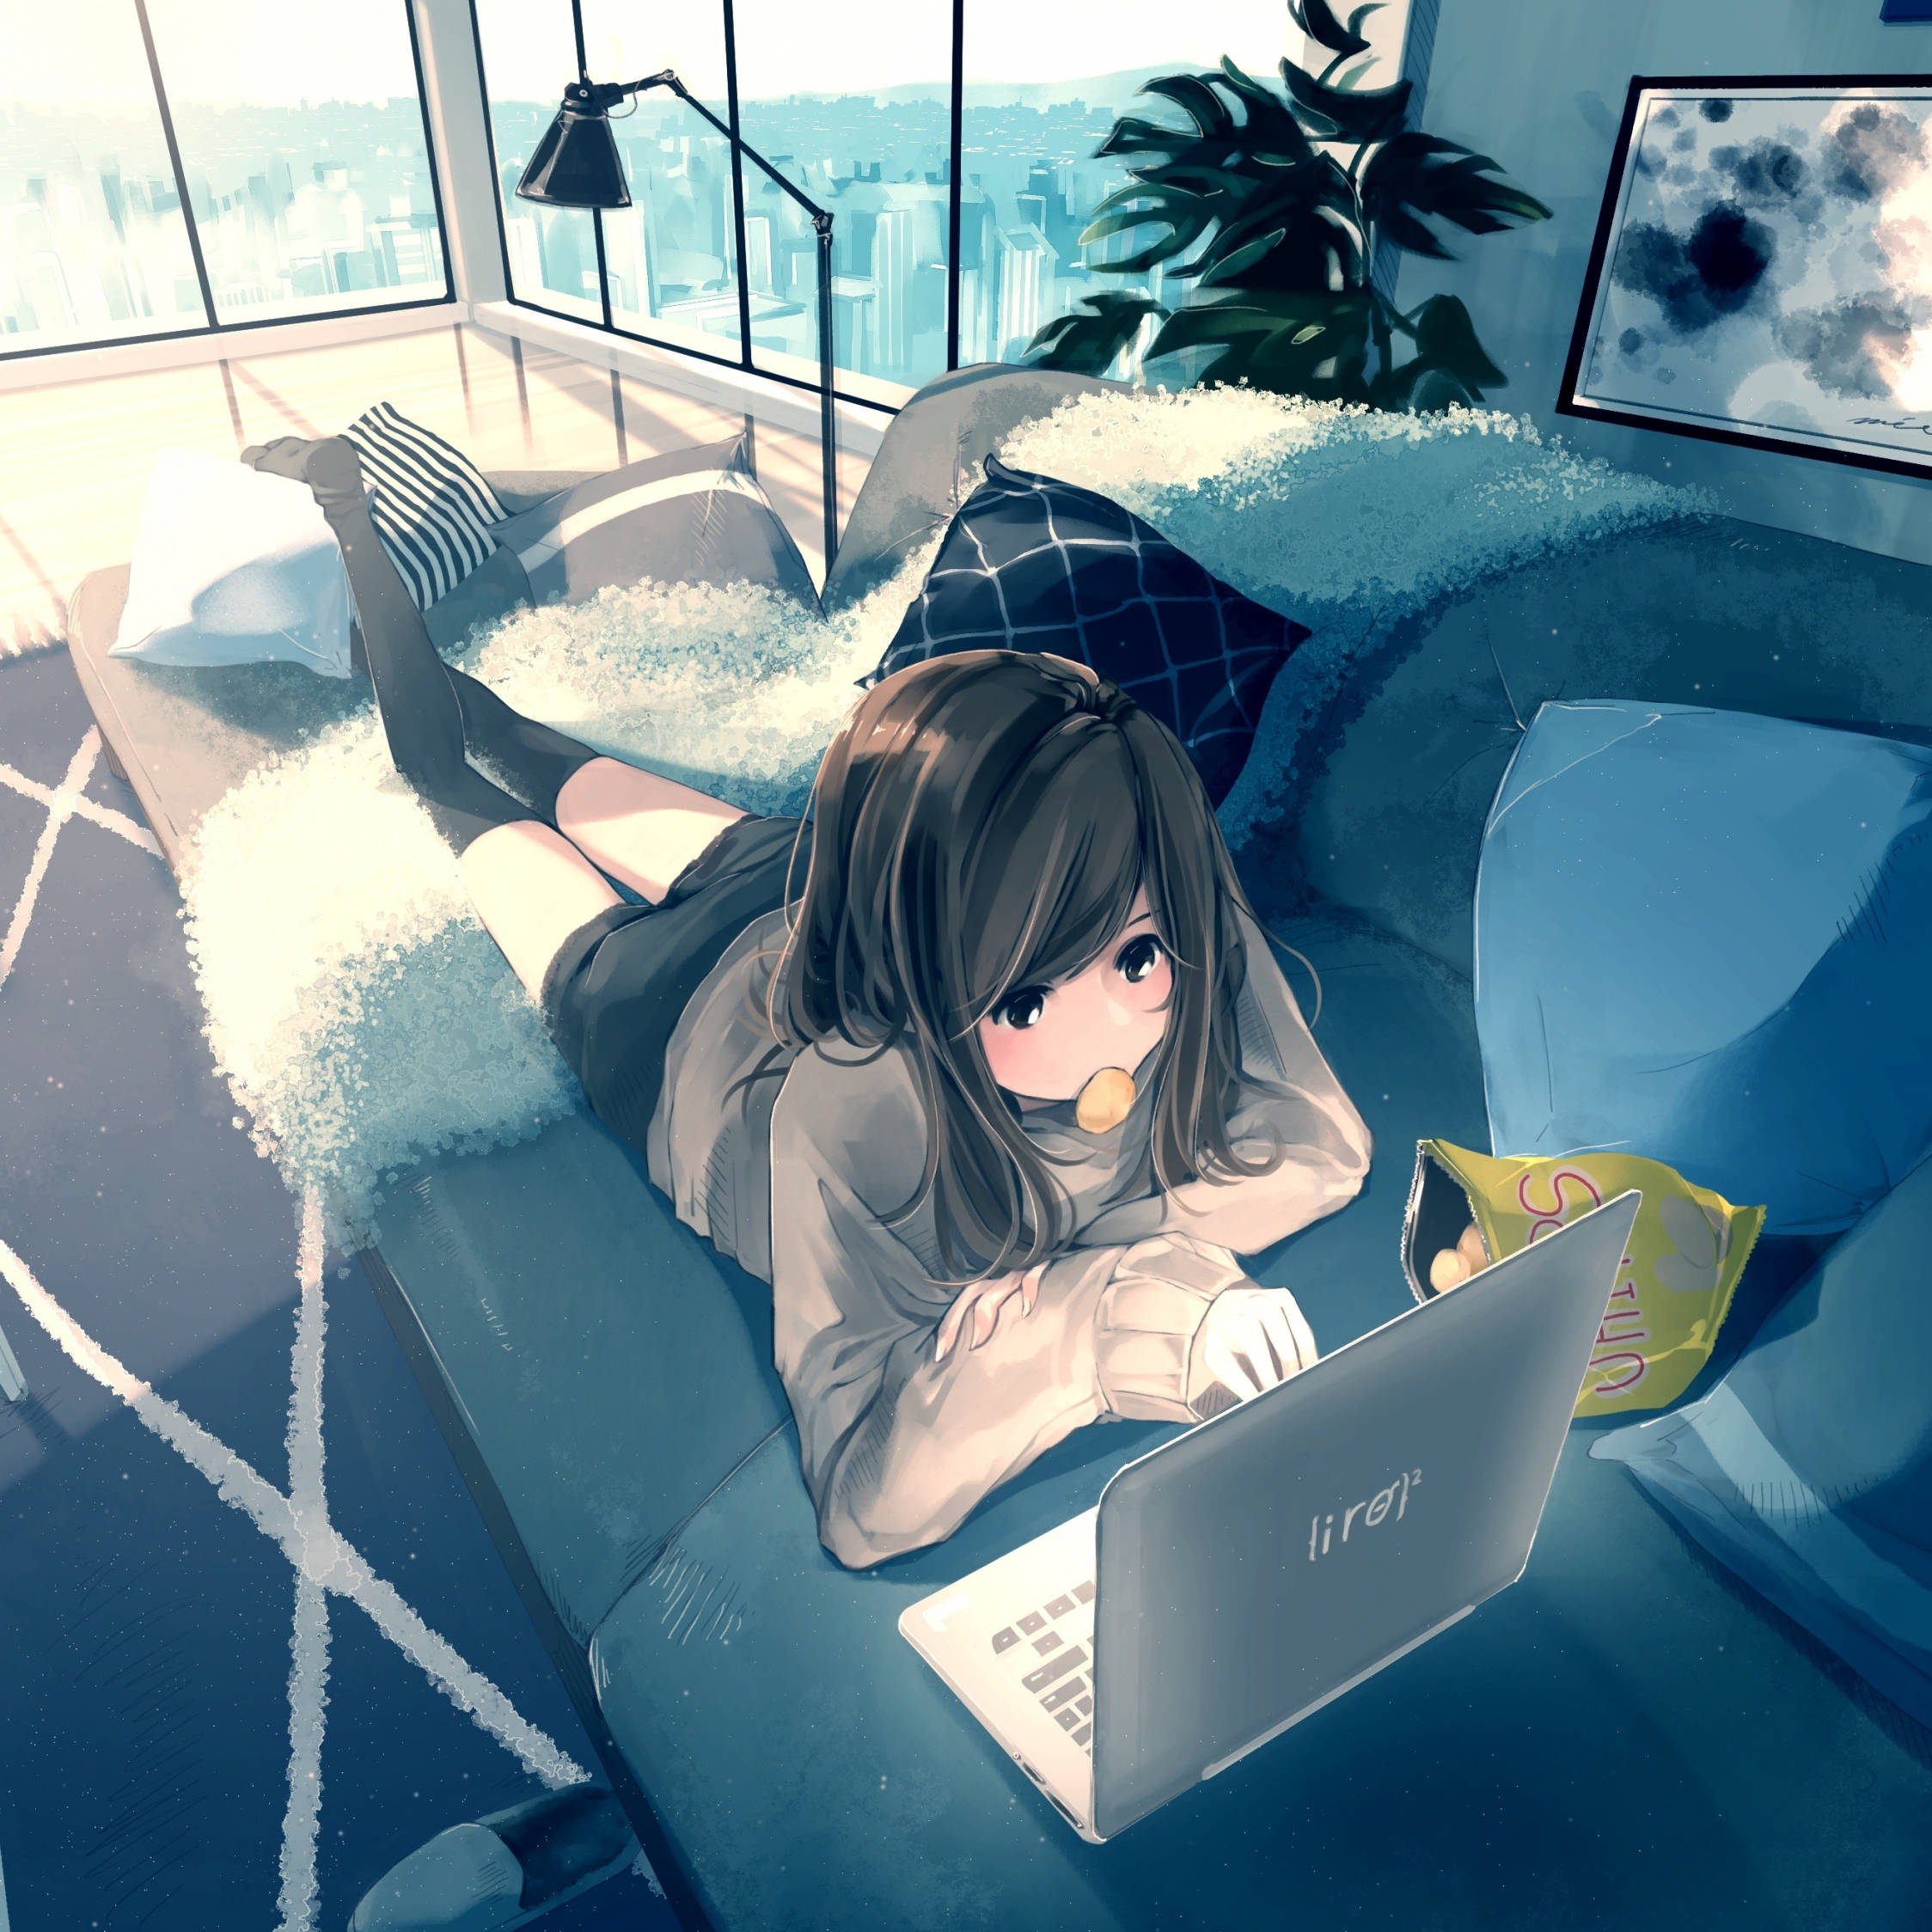 Download Anime Girl Lies Down Working On Her Laptop Wallpaper |  